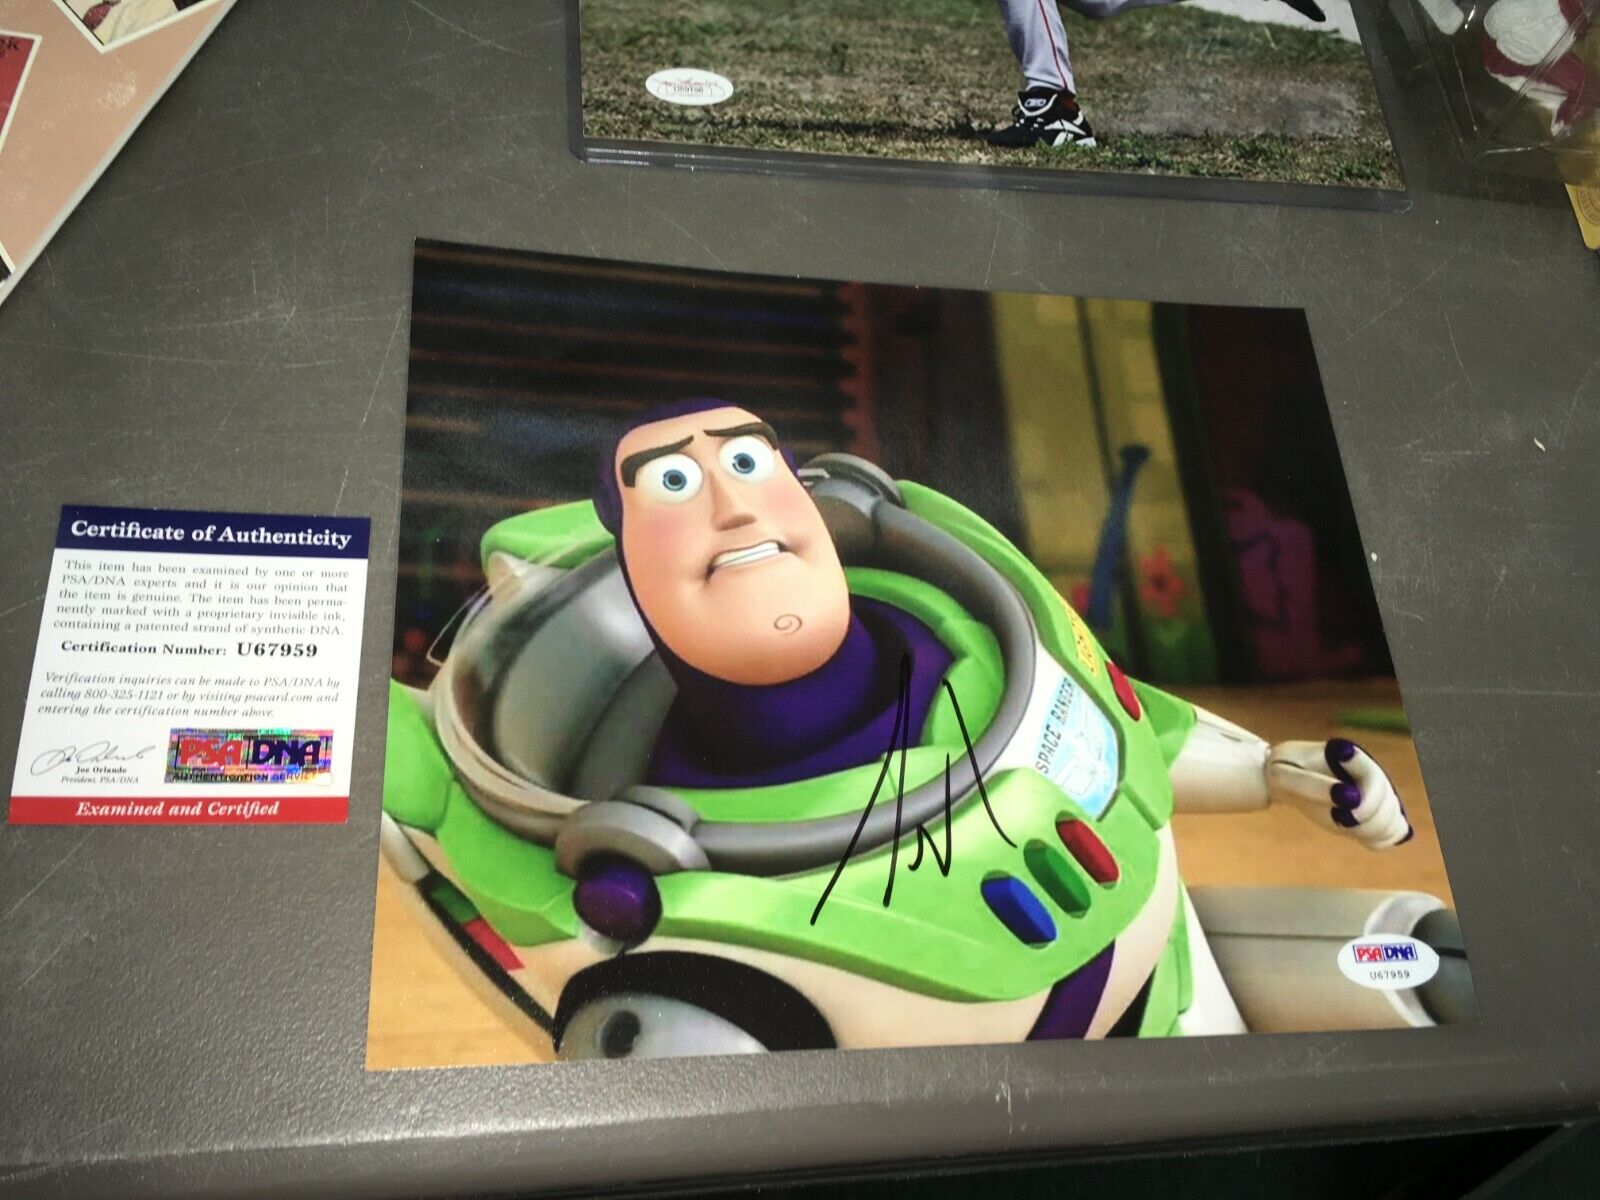 Tim Allen Buzz Lightyear Signed 8x10 Photo Poster painting PSA/DNA Certified